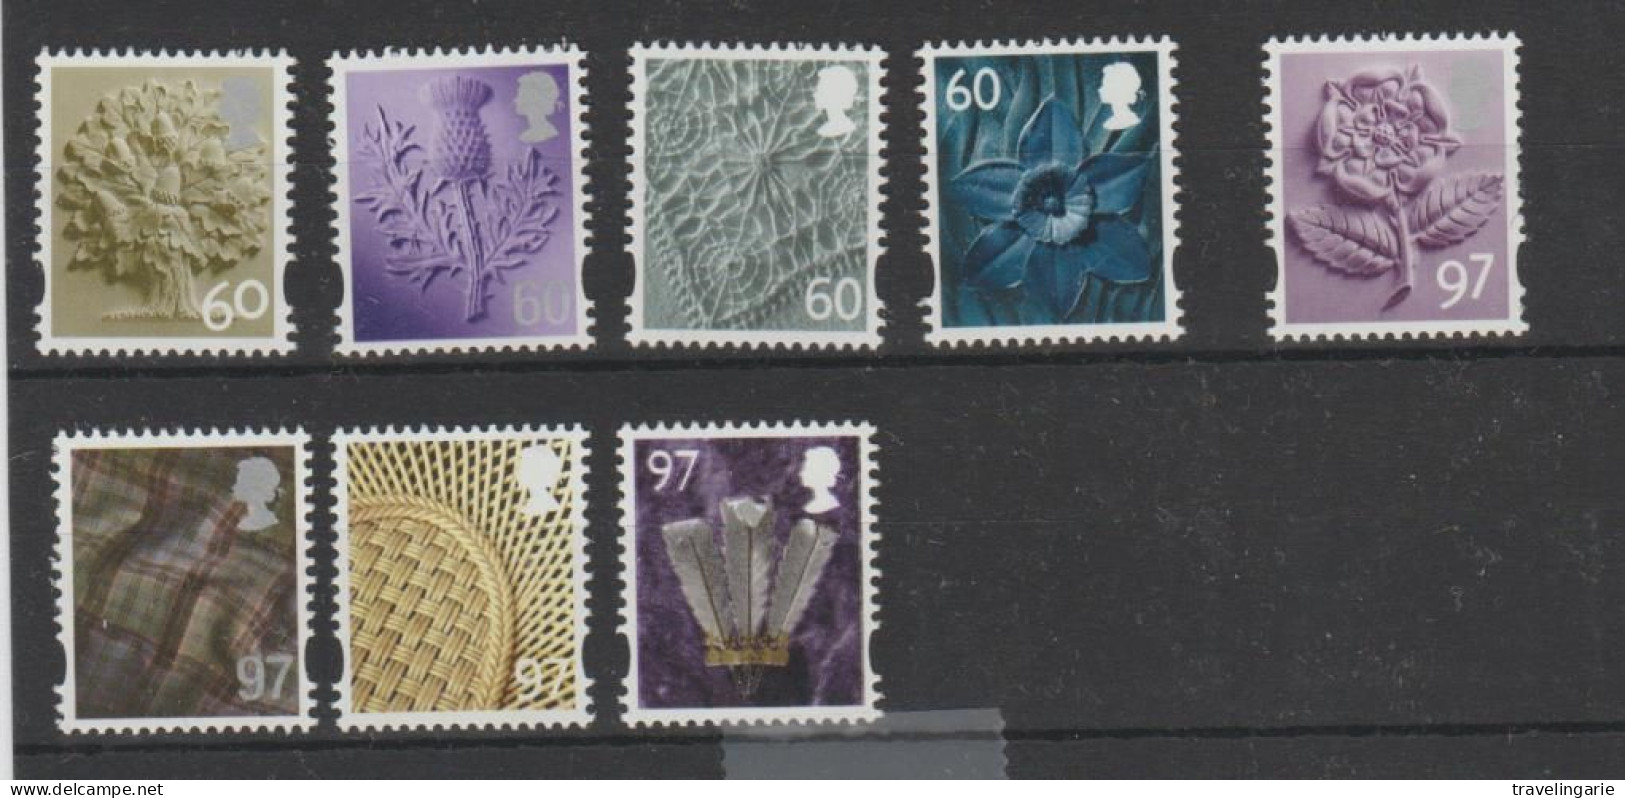 Great Britain 2010 Regional Issue MNH ** - Unused Stamps